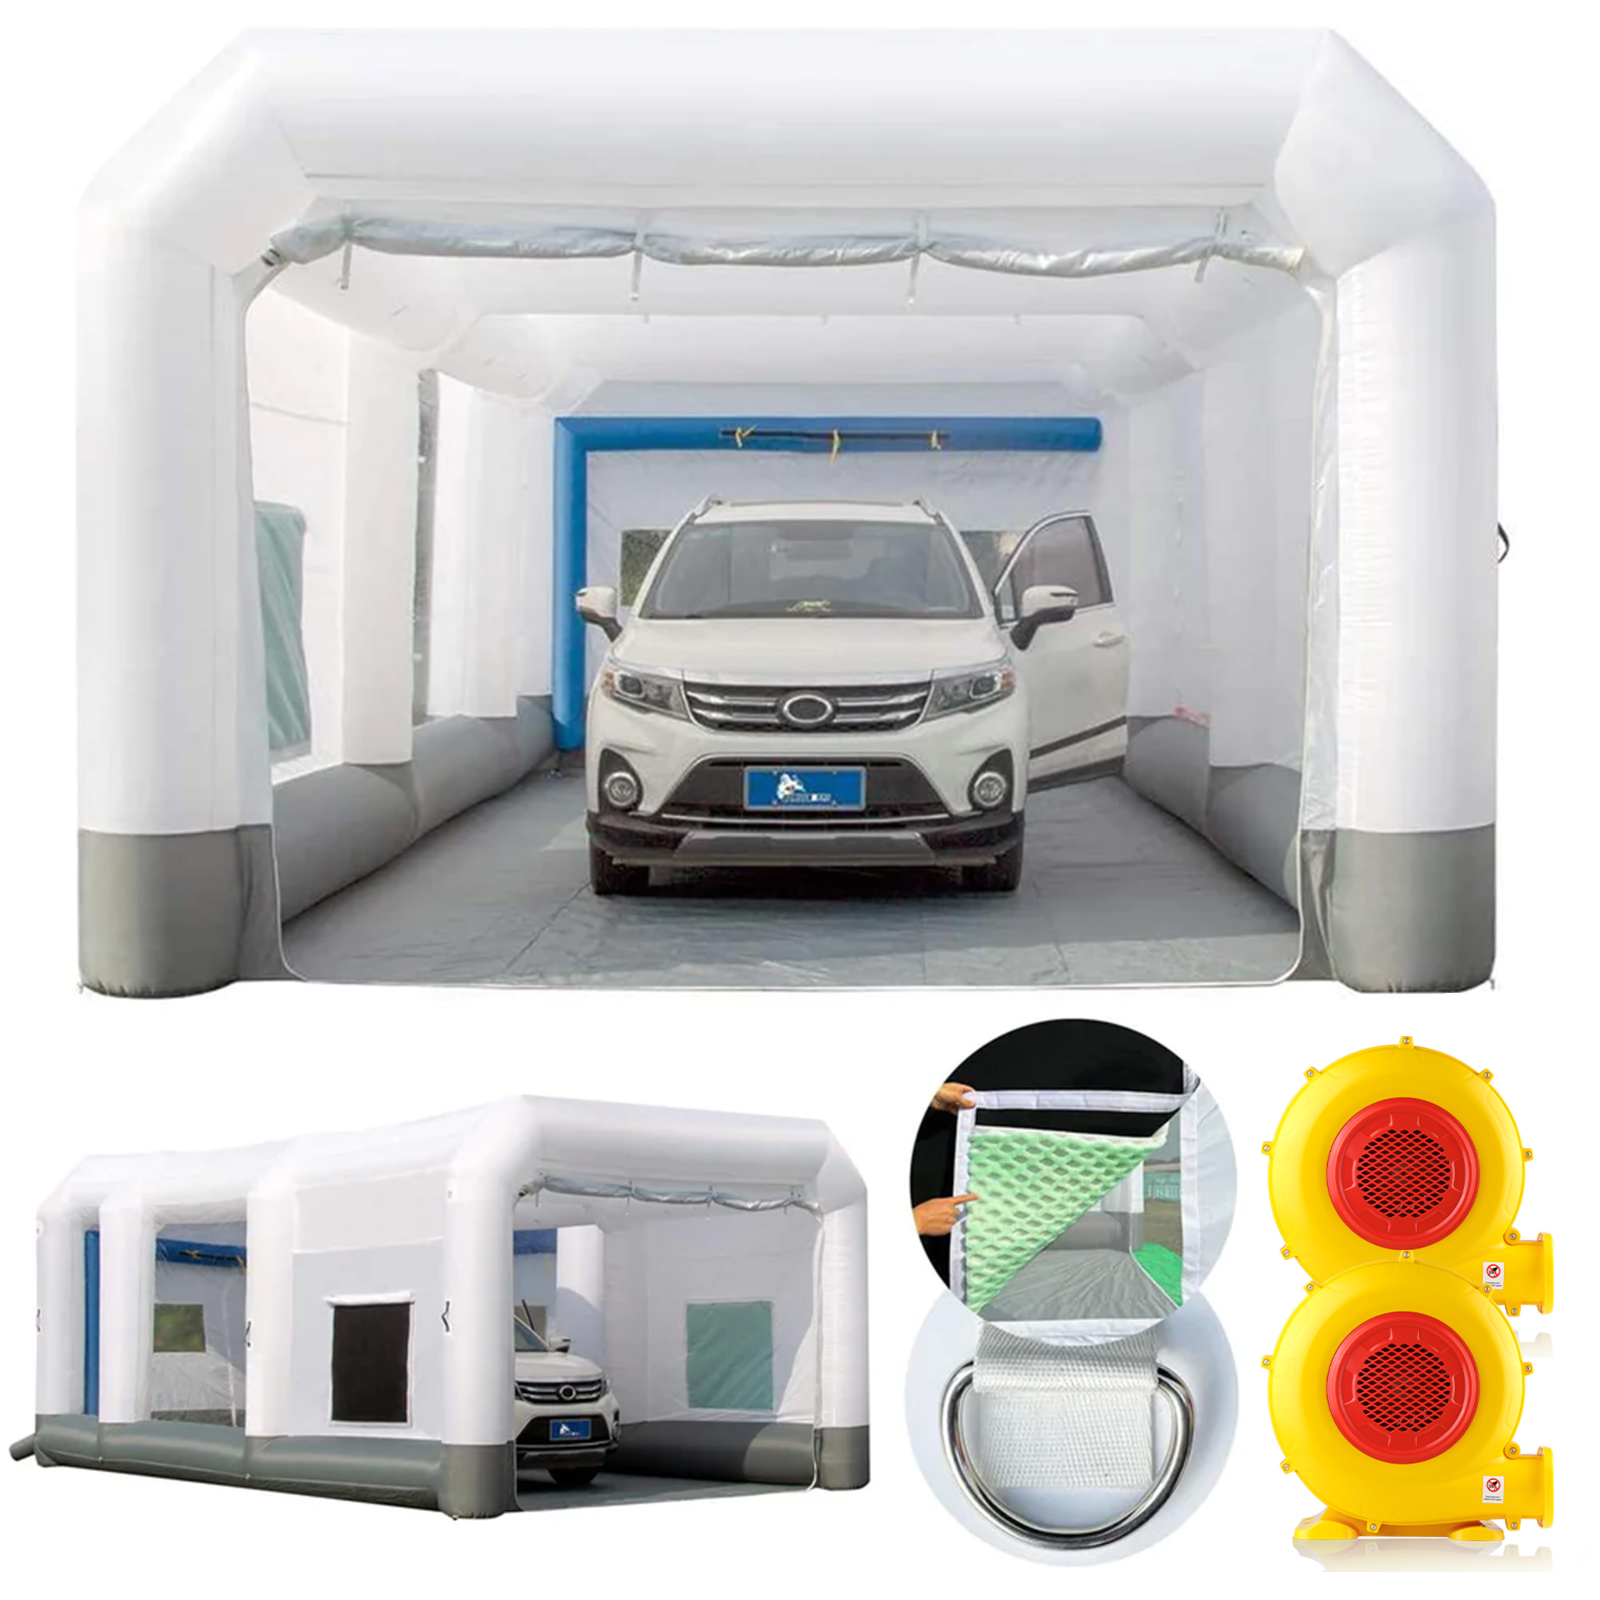  New Version Sewinfla Airtight Waterproof Paint Booth